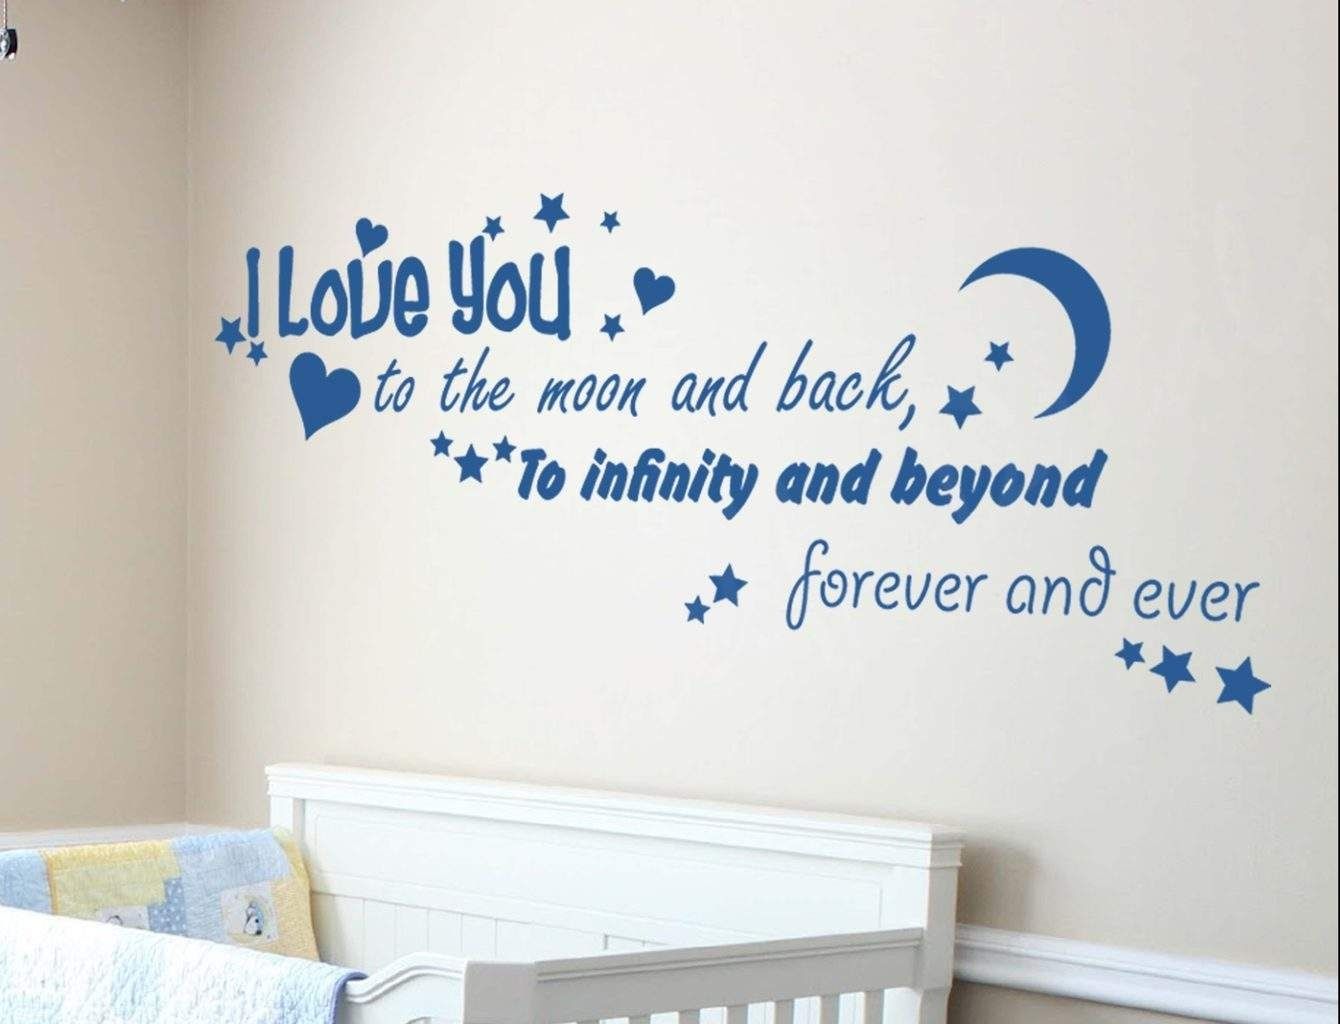 Spread Love With Love Based Wall Decals With Regard To I Love You To The Moon And Back Wall Art (Photo 6 of 20)